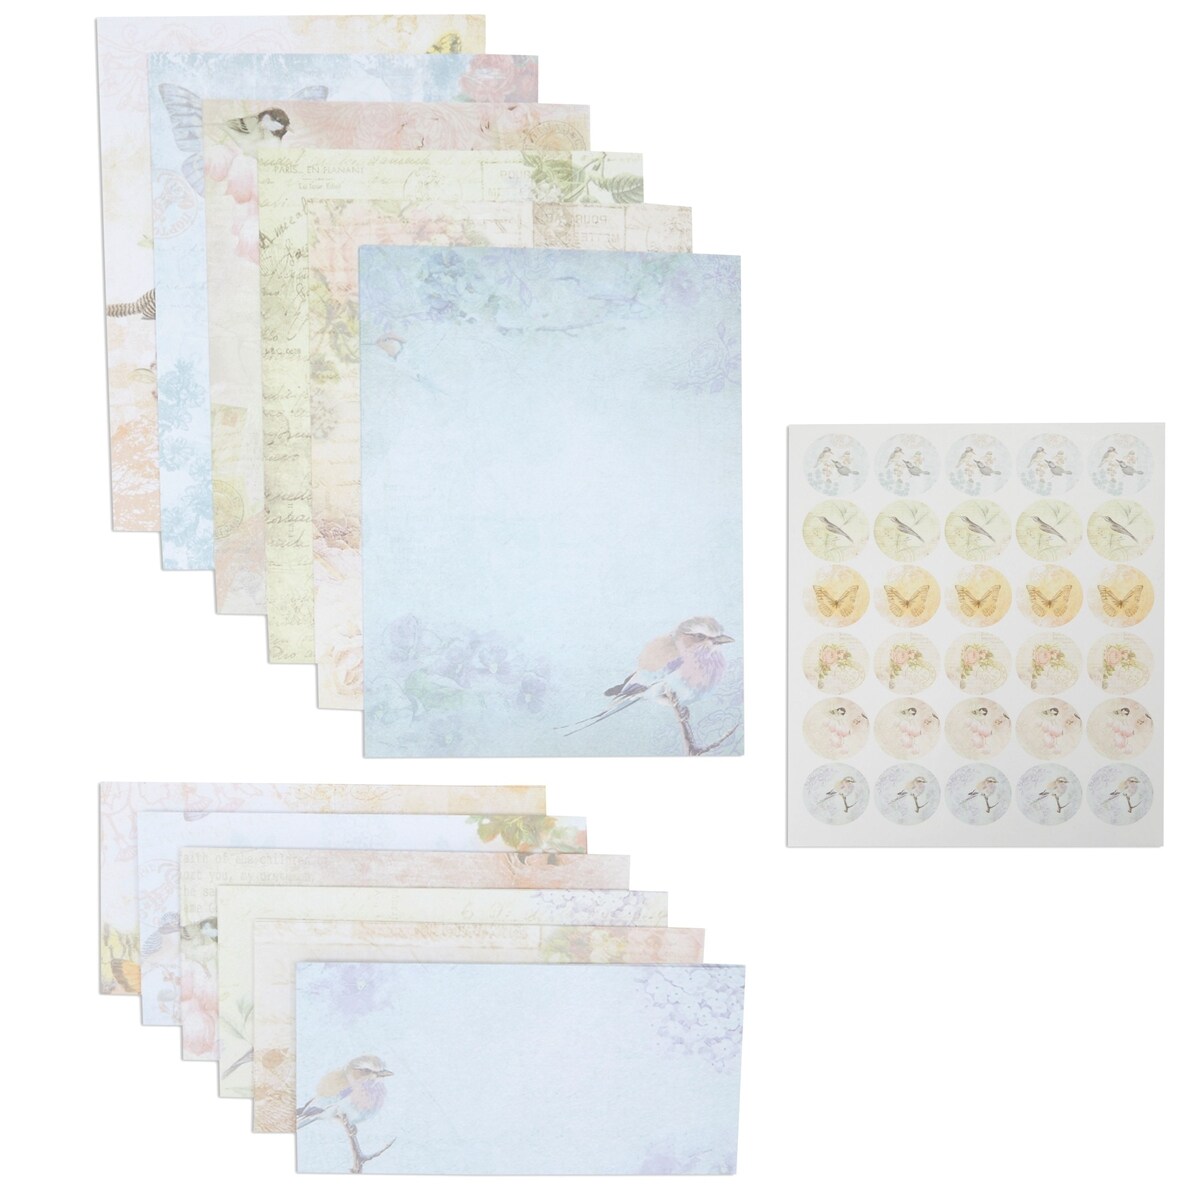 Paper Master Vintage Stationary Set, Old Fashion Letter Writing Stationary Paper and Envelopes Set, 48 Sheets Feather Stationery Set with 24